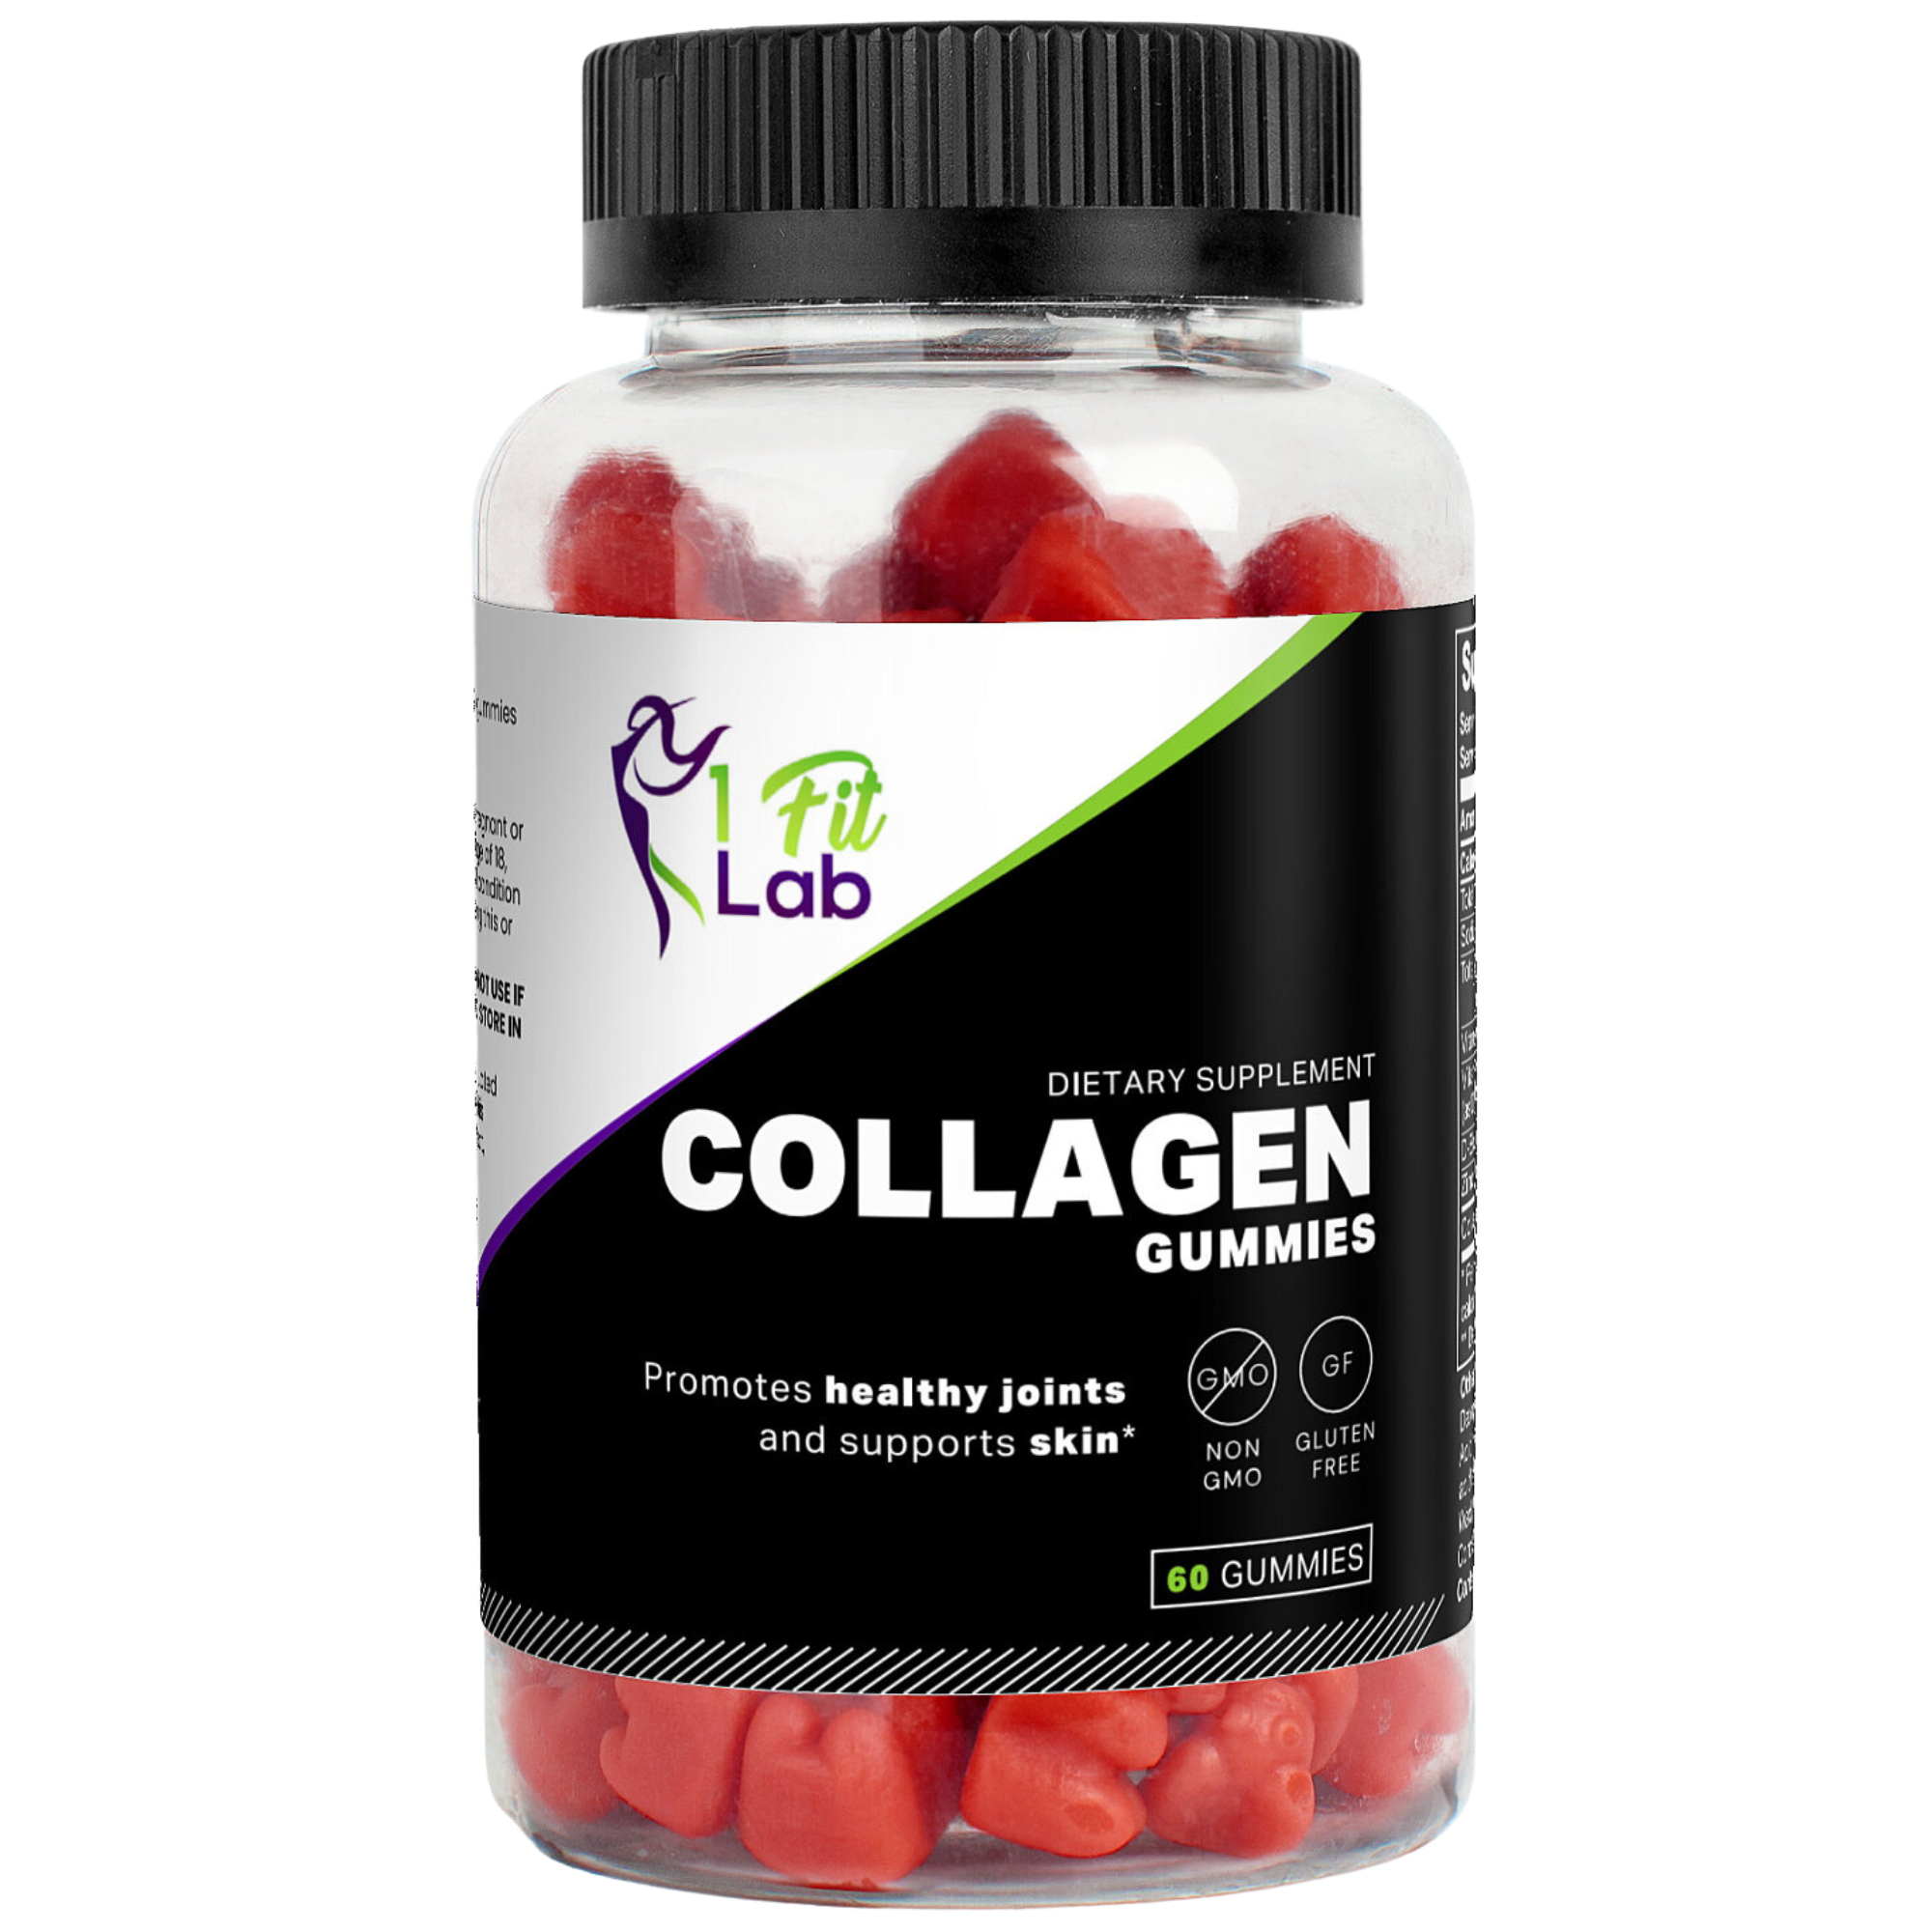 Bottle of Collagen Gummies with Vitamins C & E for hair, skin, and joint support